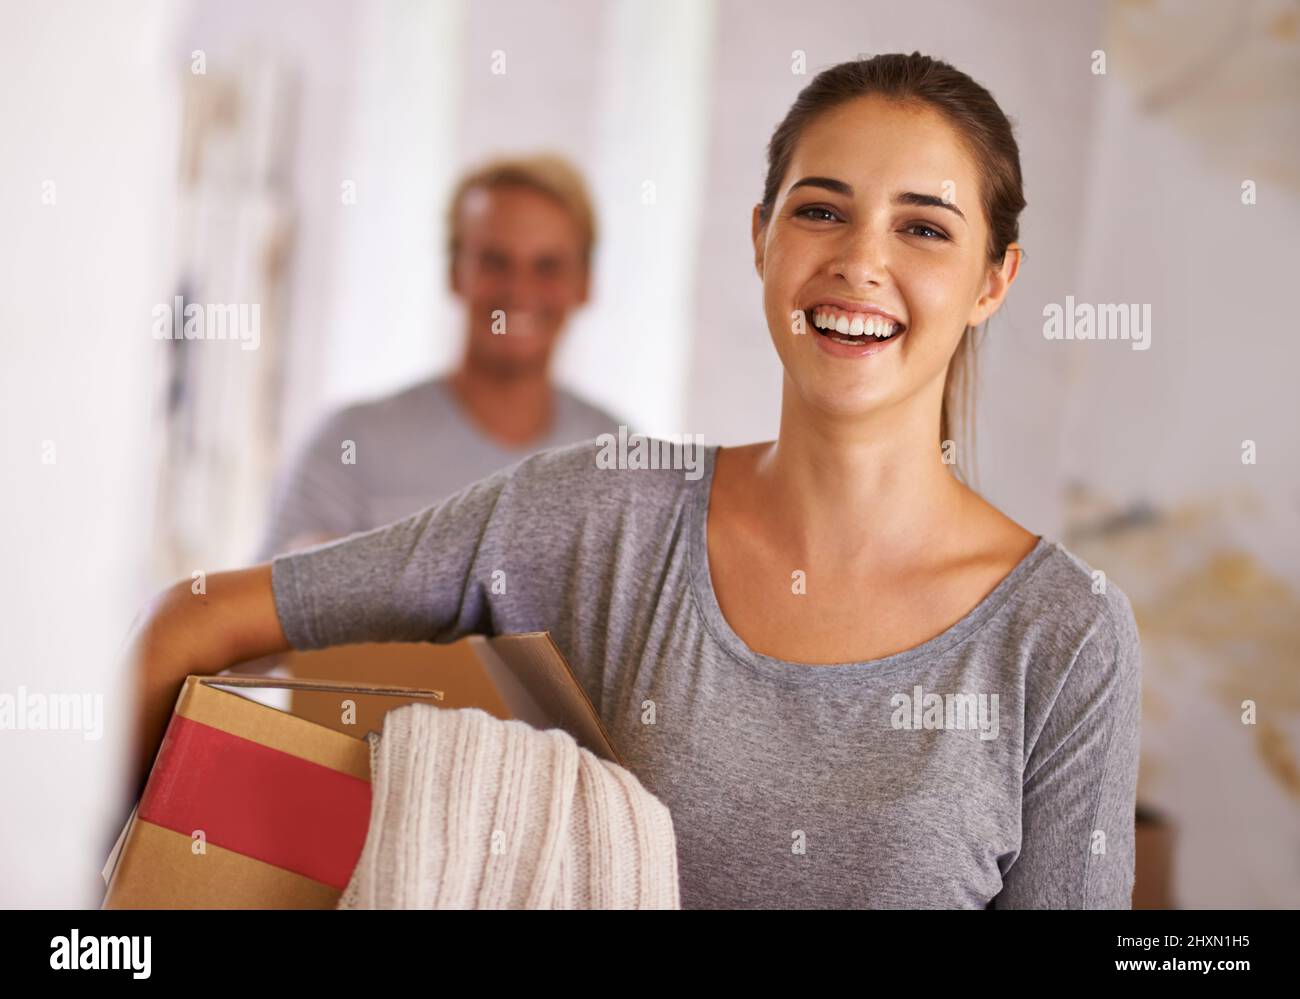 Moving onwards and upwards. Portrait of a young woman holding a box on moving day. Stock Photo